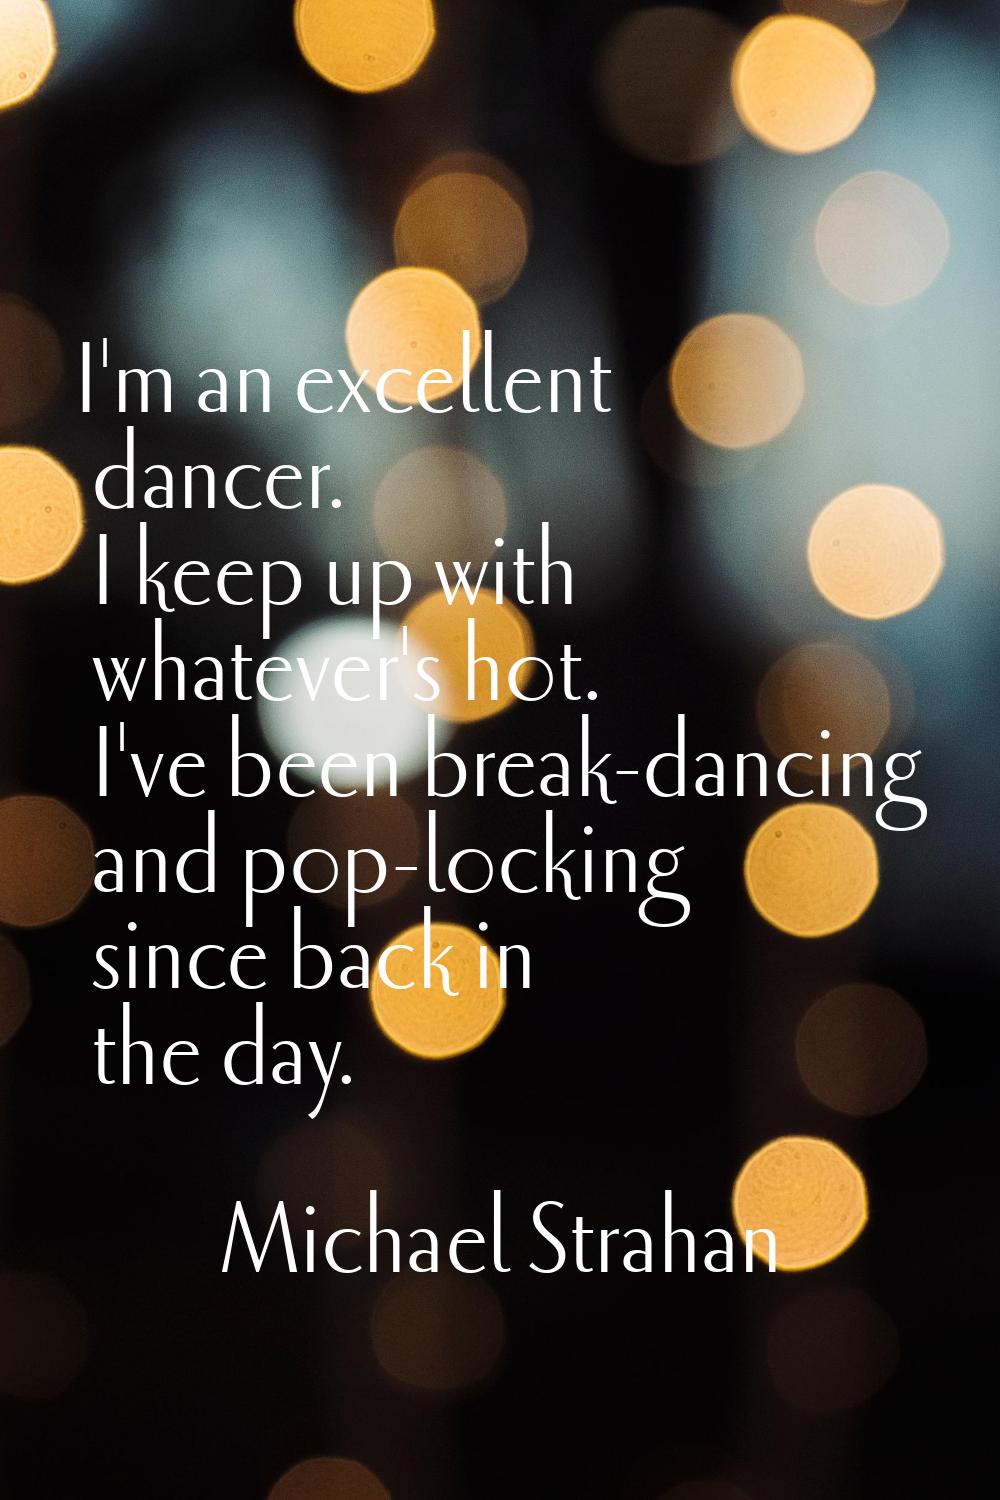 I'm an excellent dancer. I keep up with whatever's hot. I've been break-dancing and pop-locking sin